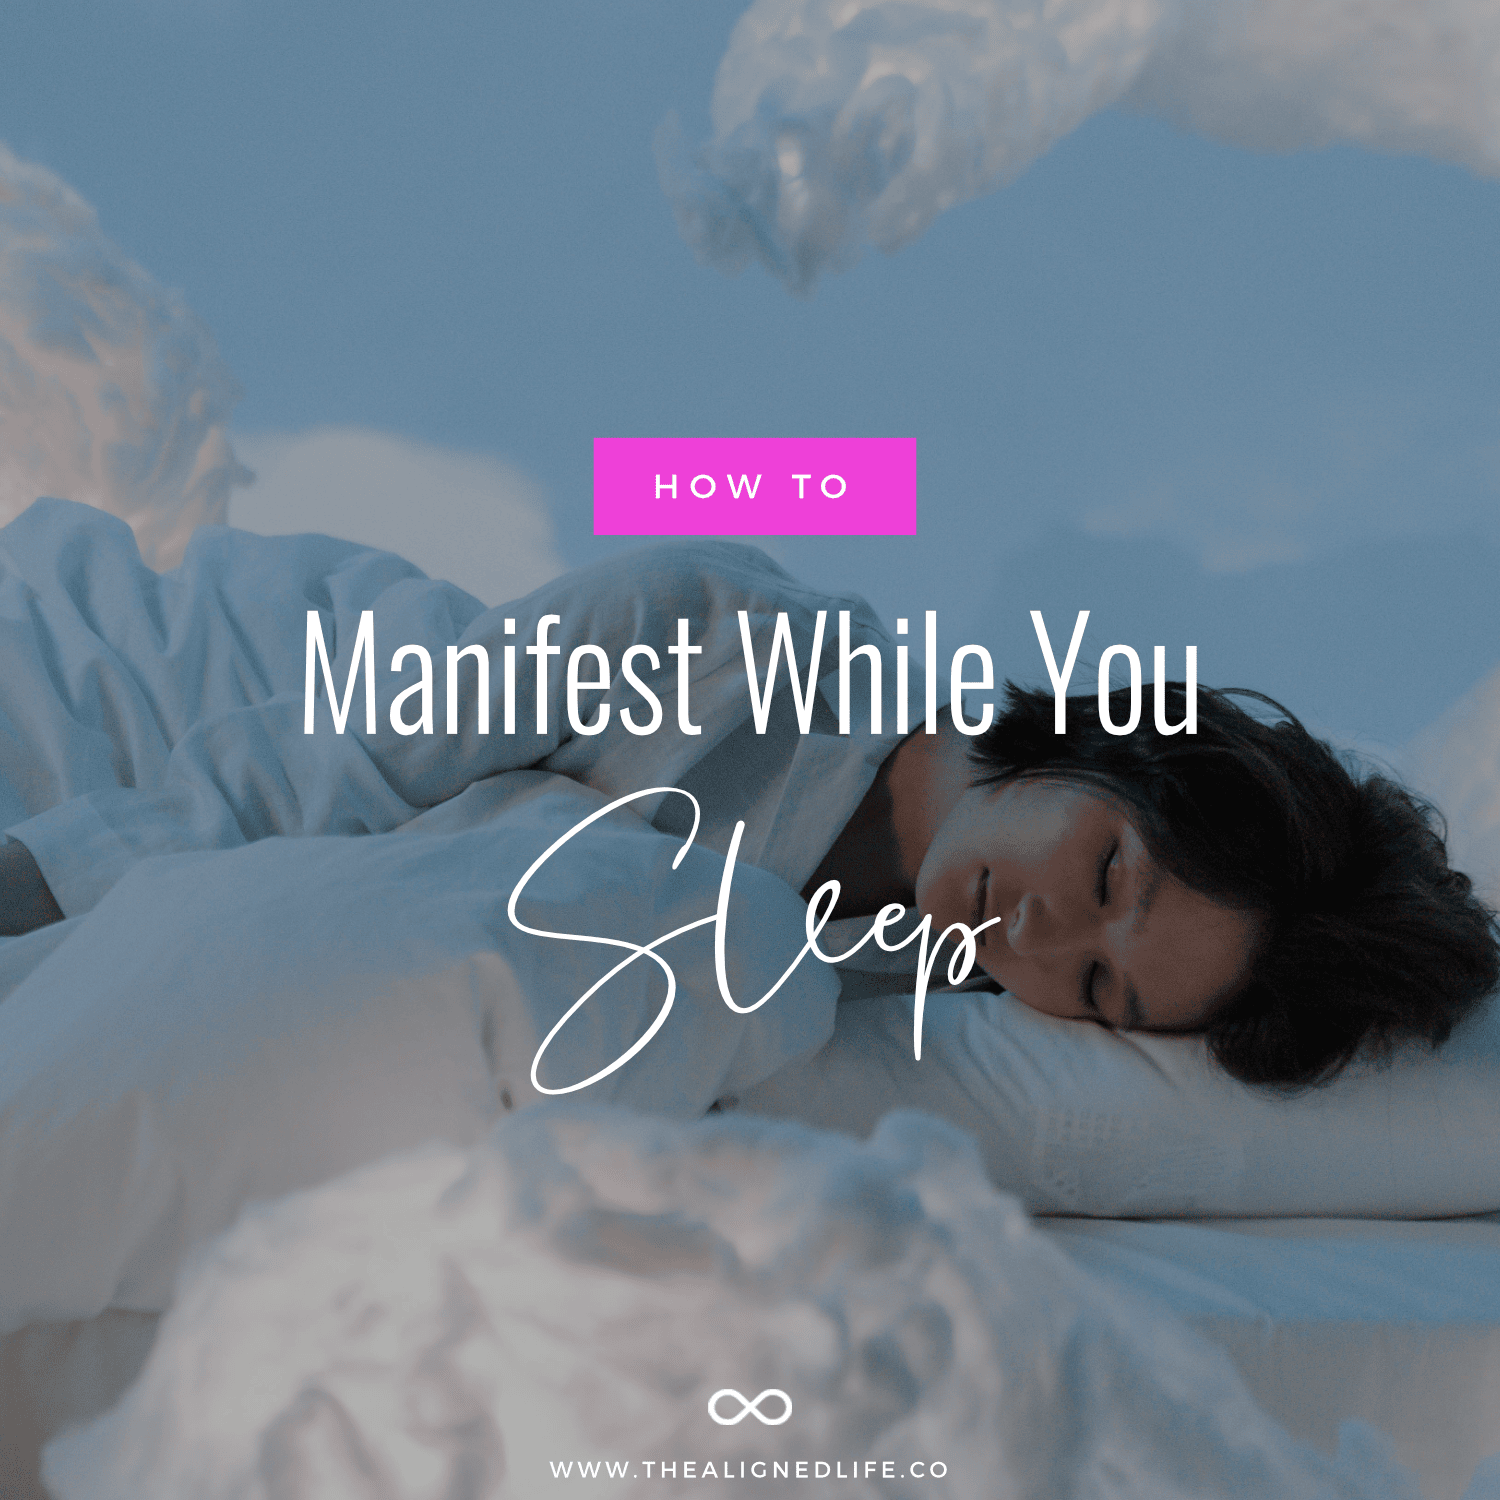 How To Manifest While You Sleep